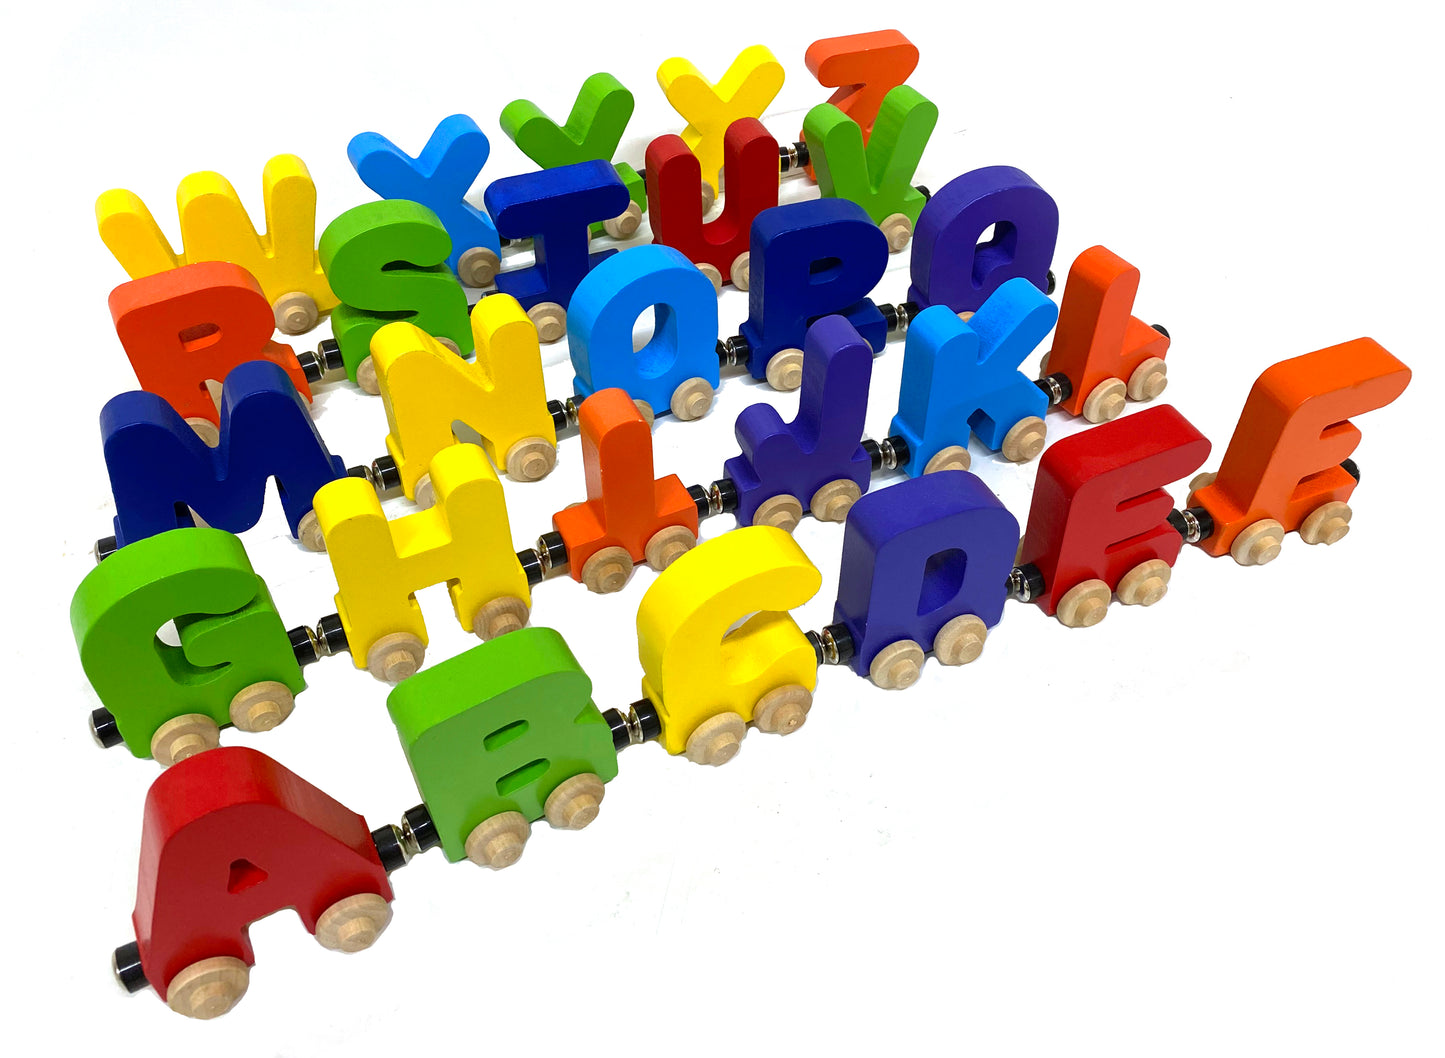 10 Letter Train Wooden Perosnalized Name Letters Includes Train & Wagon Letters Puzzle Includes Train & Wagon Free